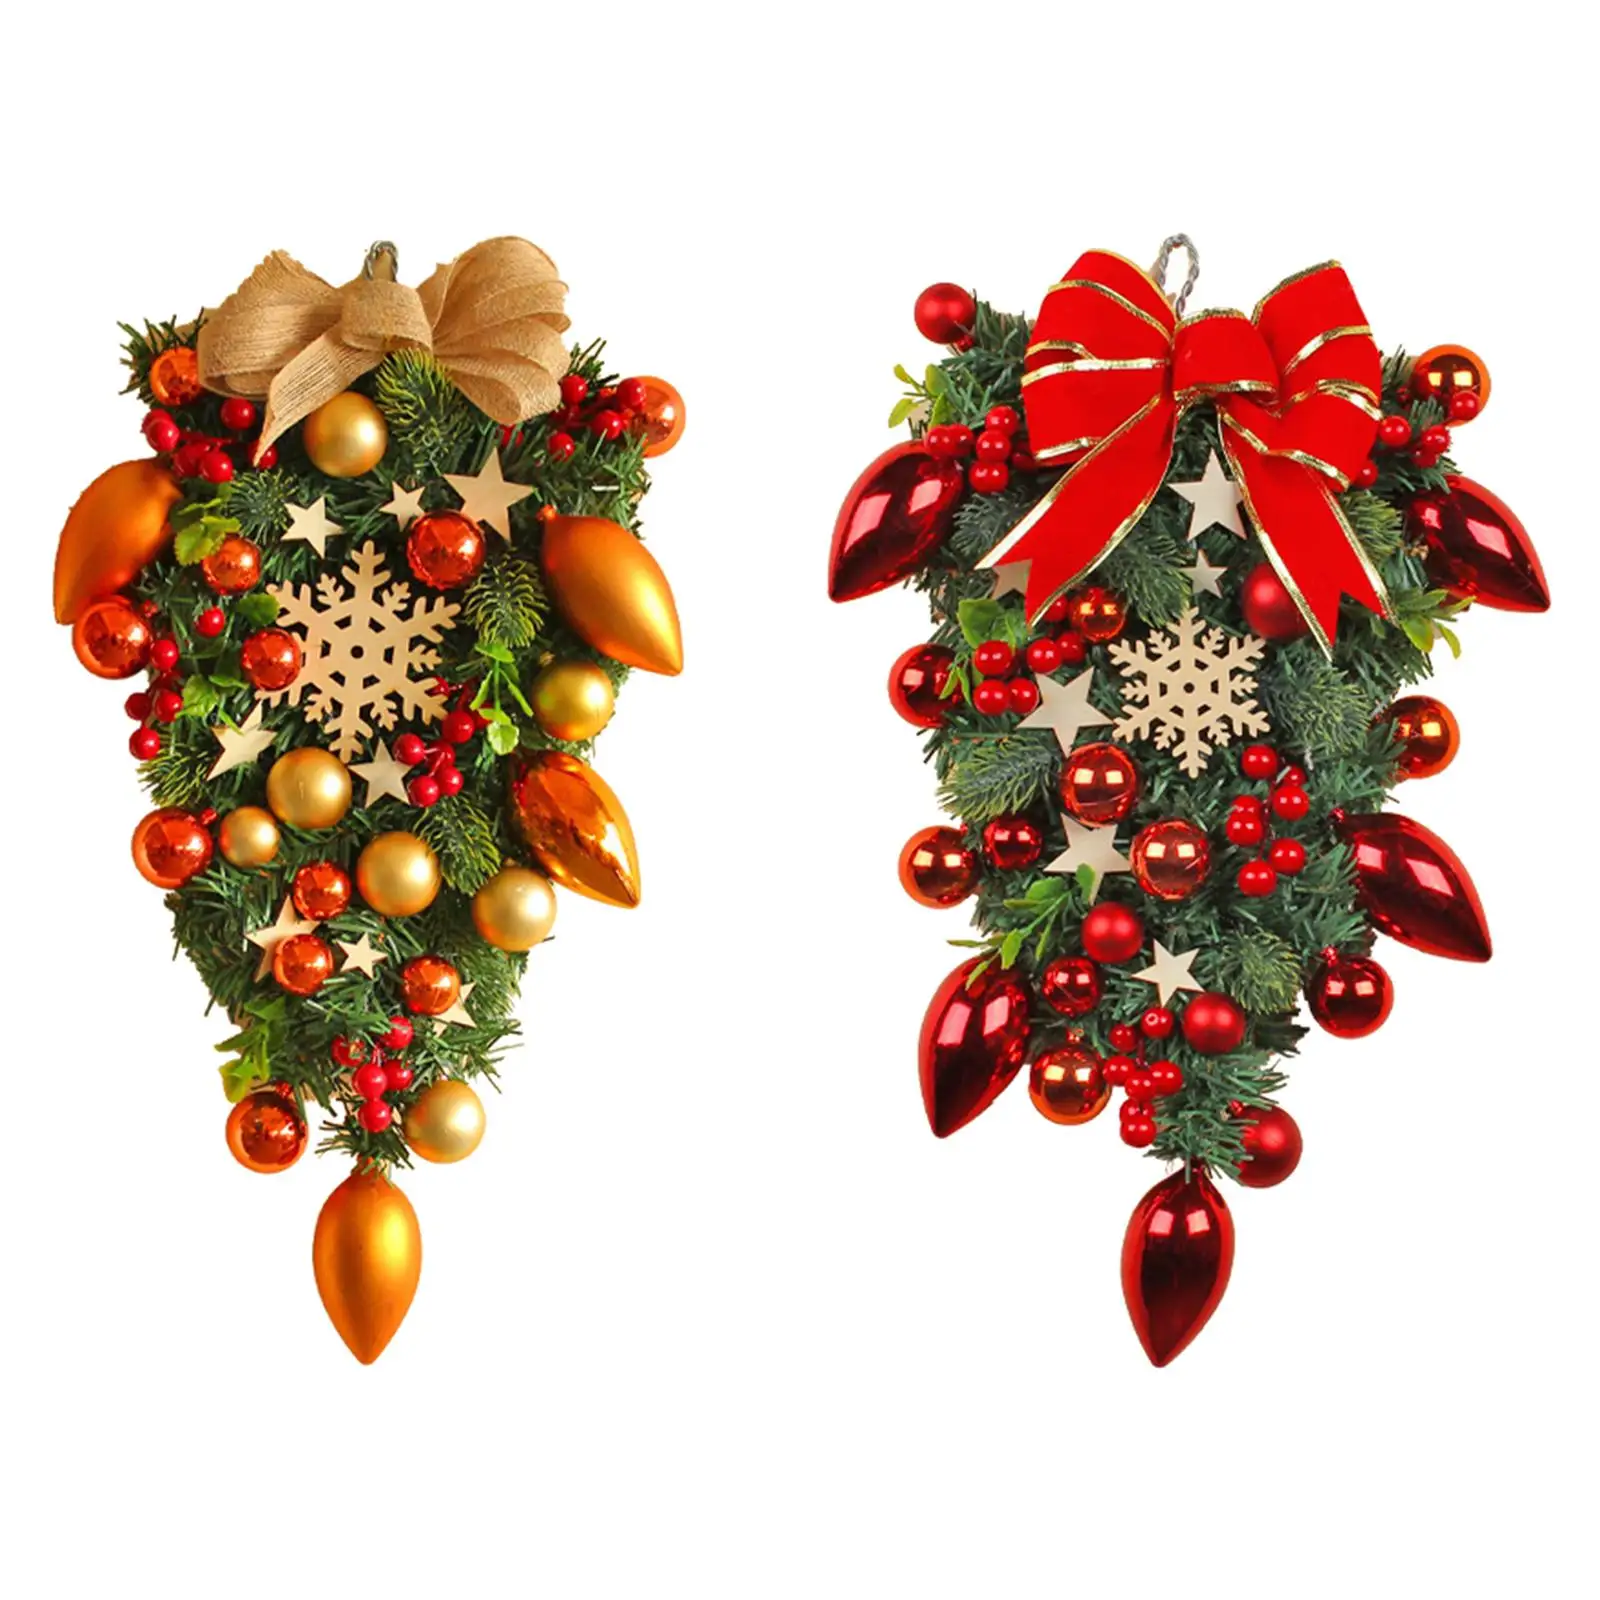 Colorful Christmas Tree Wreath Door Hanging Garland Photo Props Scene Xmas Teardrop Swag for Farmhouse Fireplace Mantle Holiday